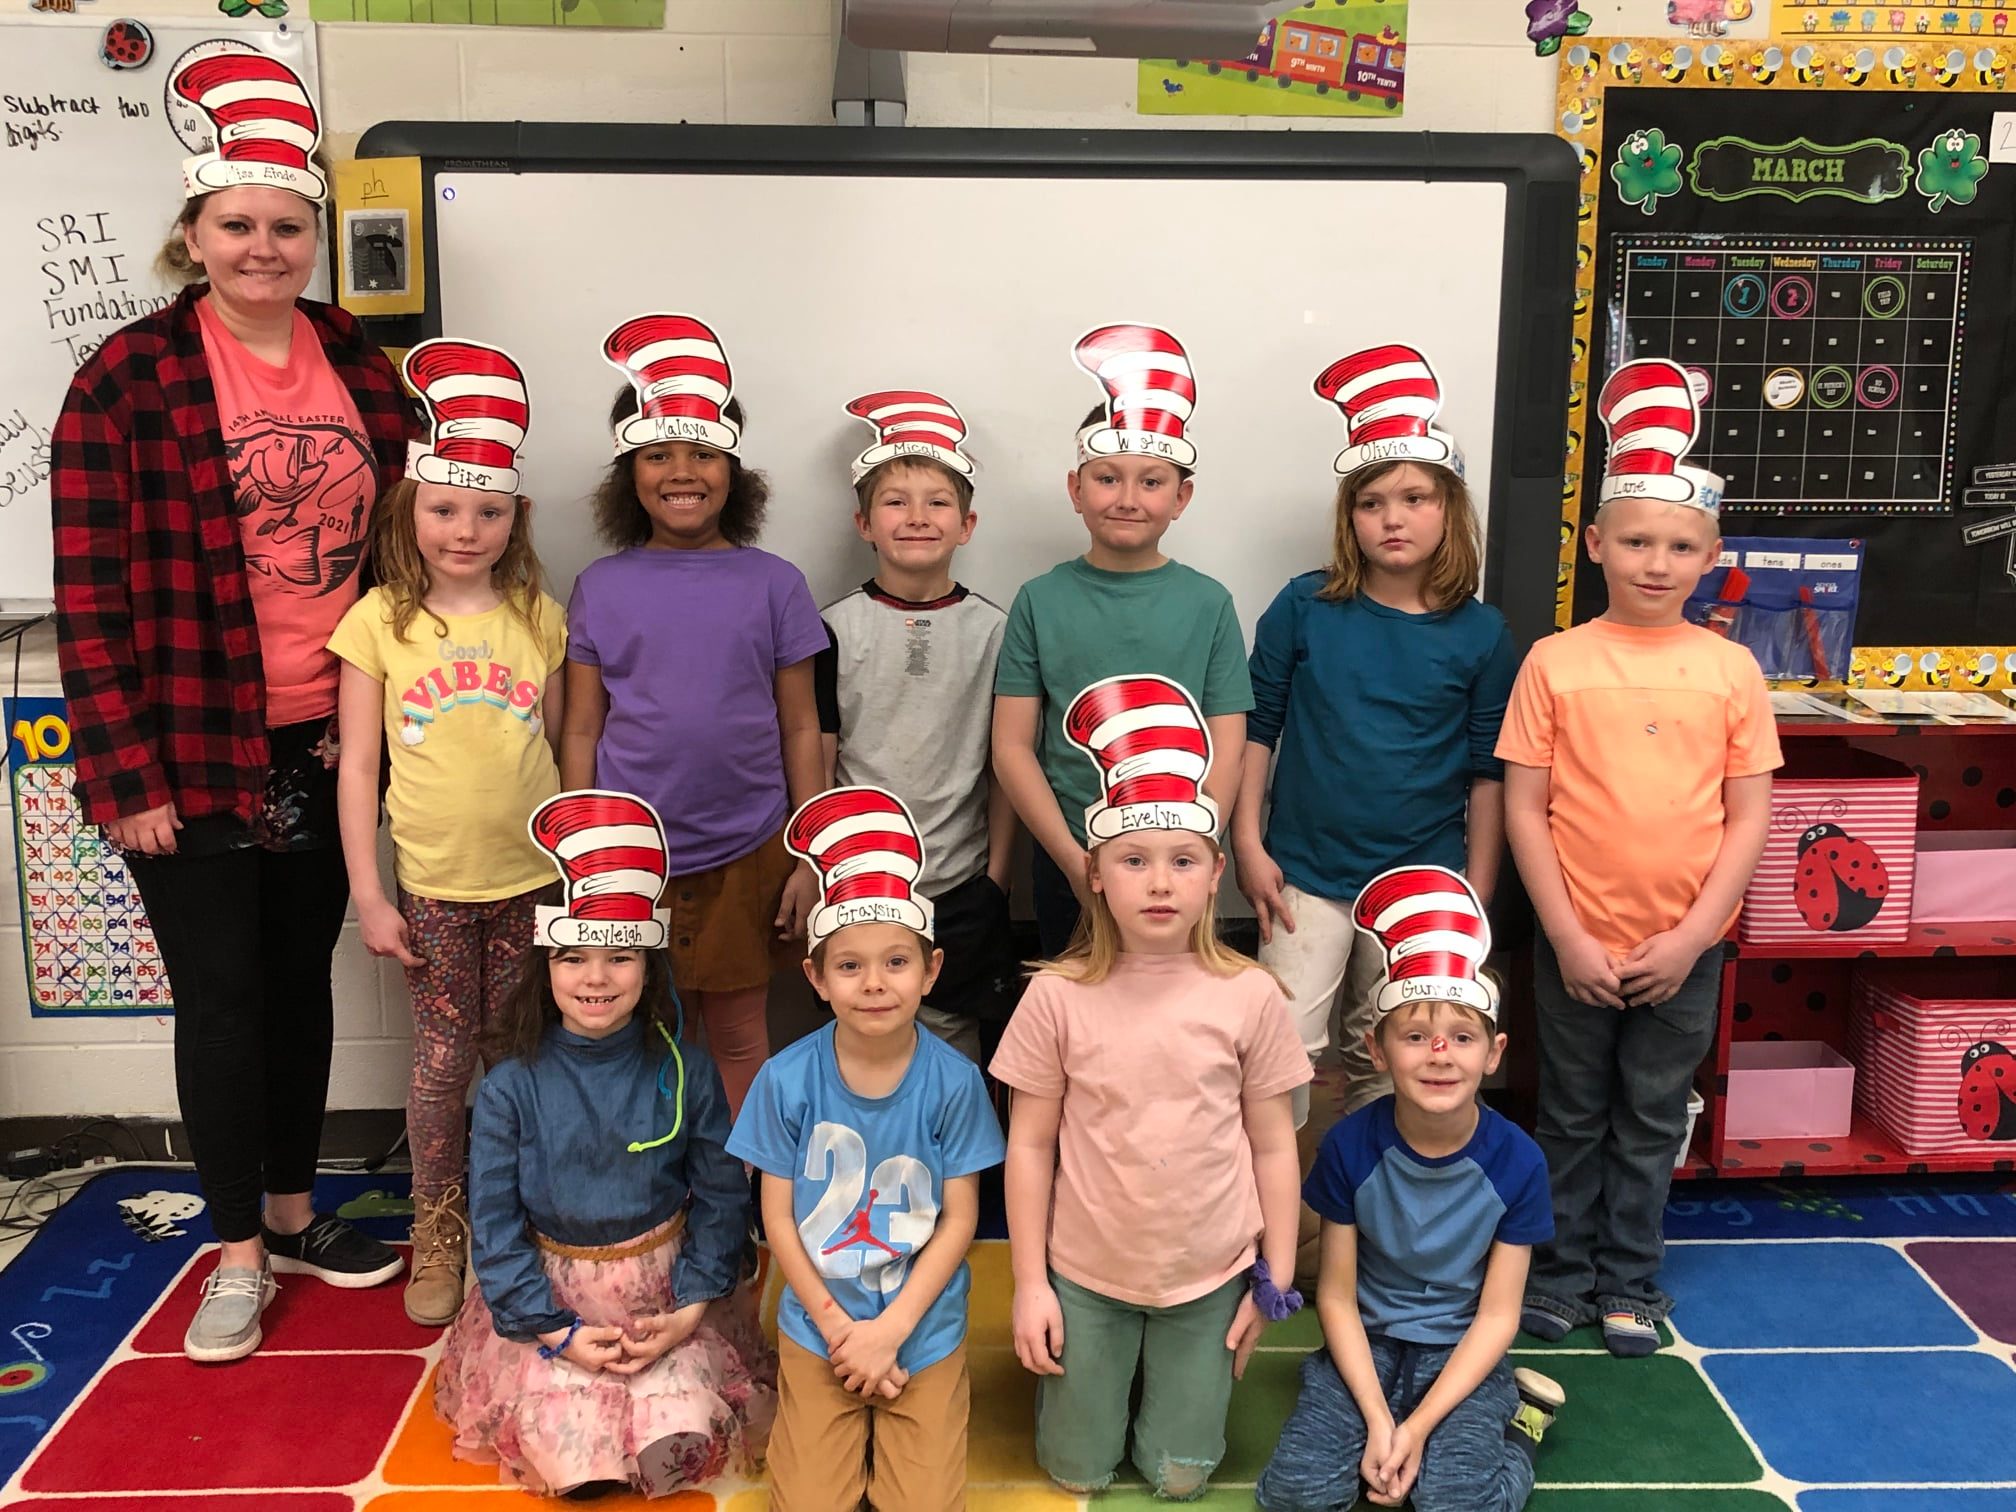 students pose with cat-in-the-hat hats on in classroom